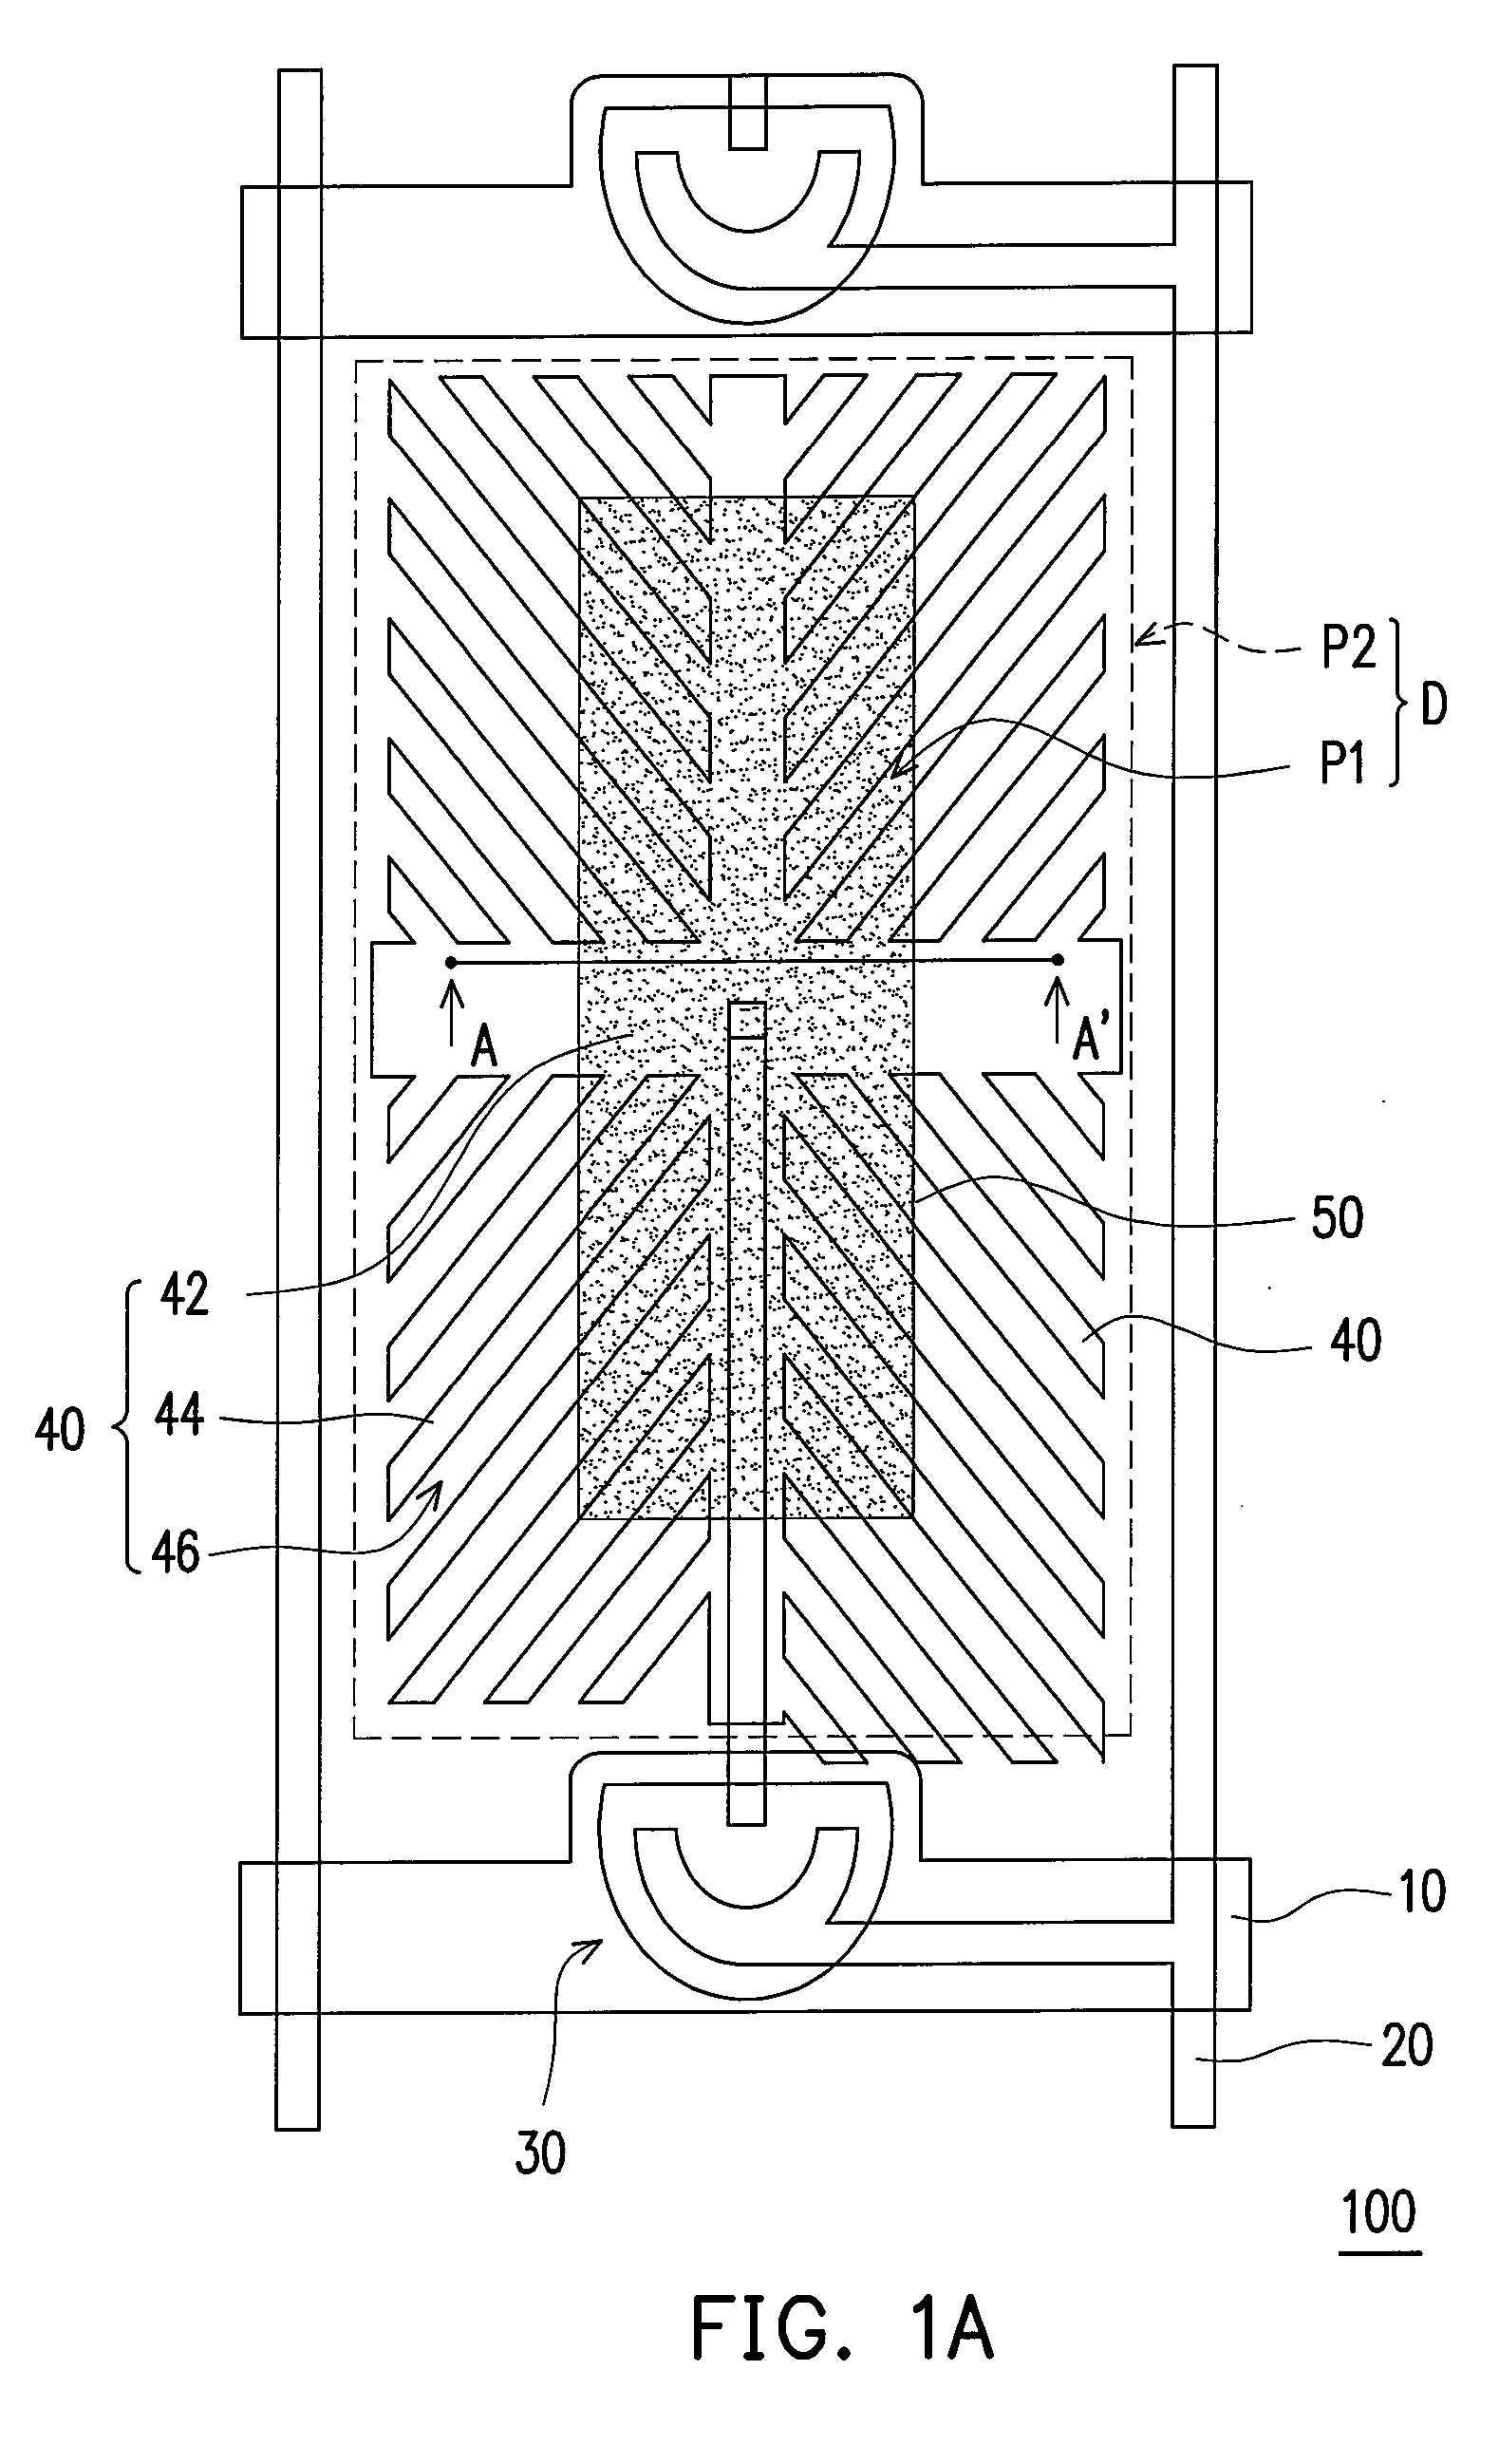 Pixel unit, liquid crystal display panel, electro-optical apparatus, and methods for manufacturing the same